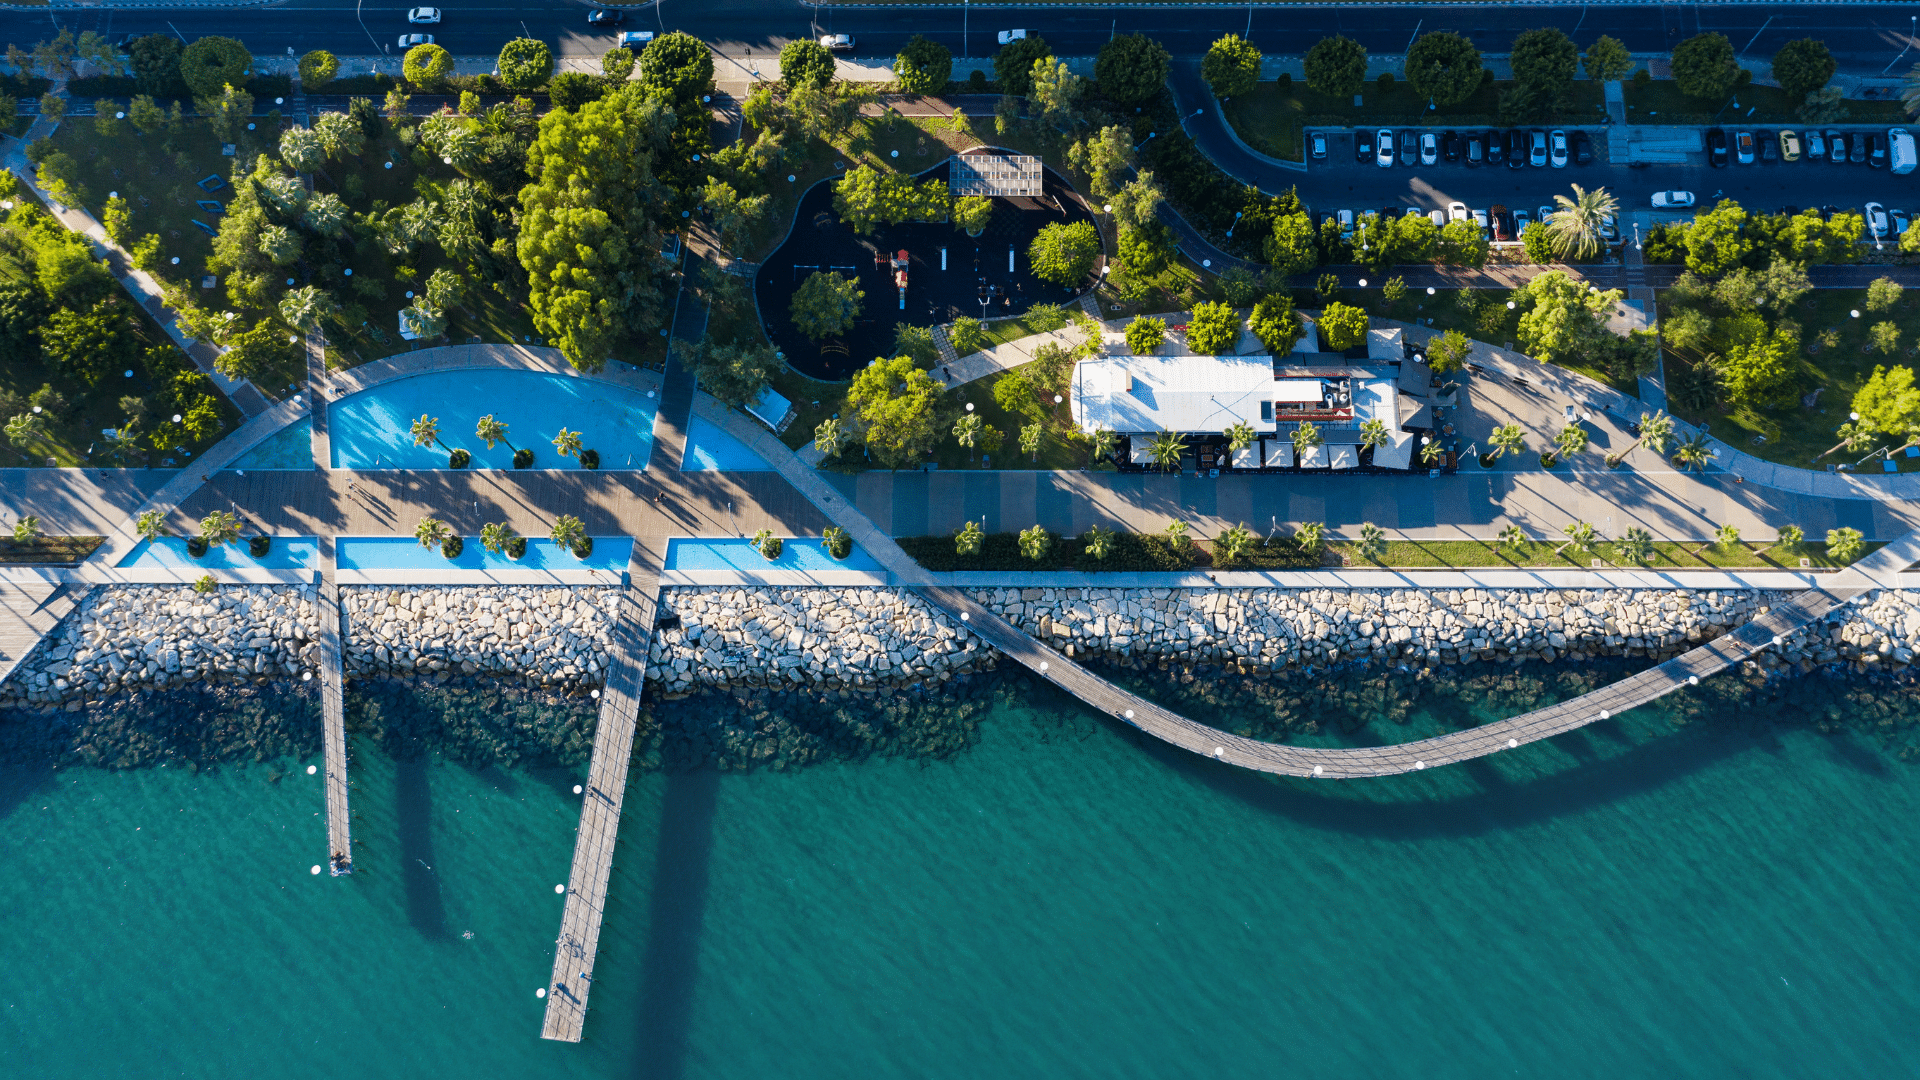 A birds eye view of a walkway, with the sea on one side and a pool and trees on the other.